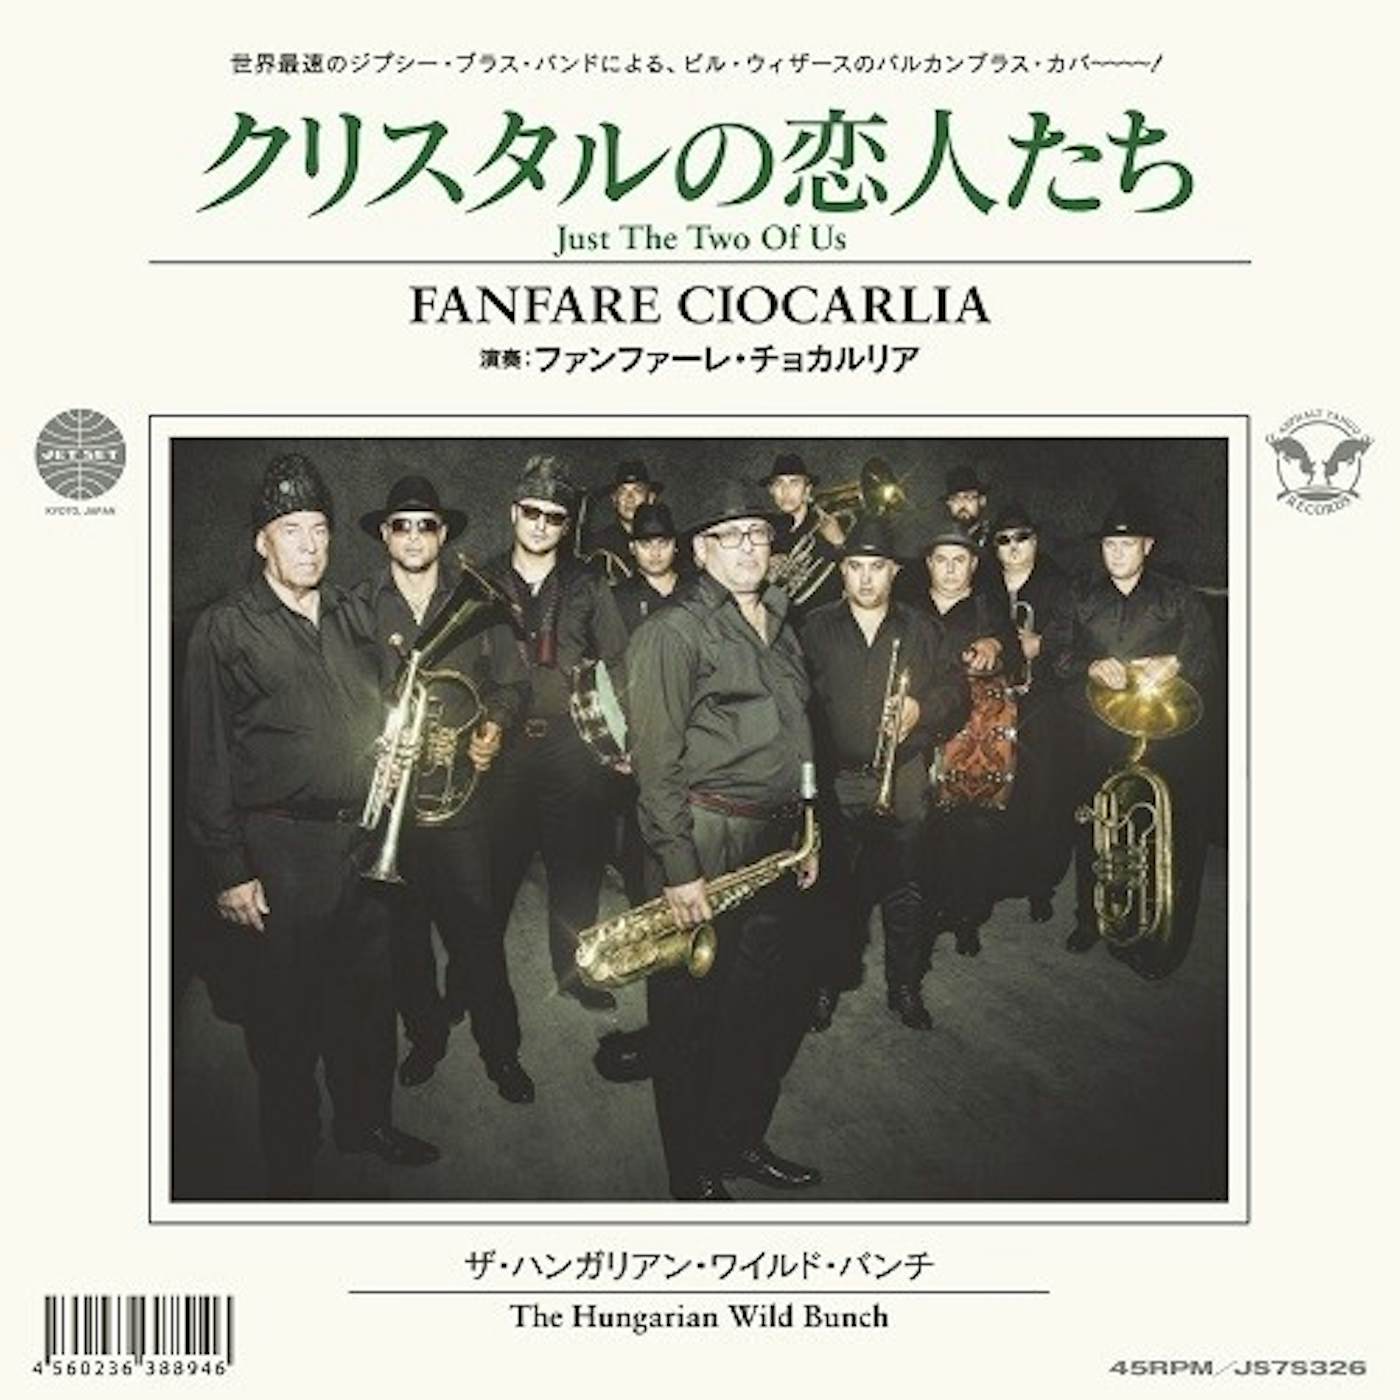 Fanfare Ciocarlia JUST THE TWO OF US Vinyl Record